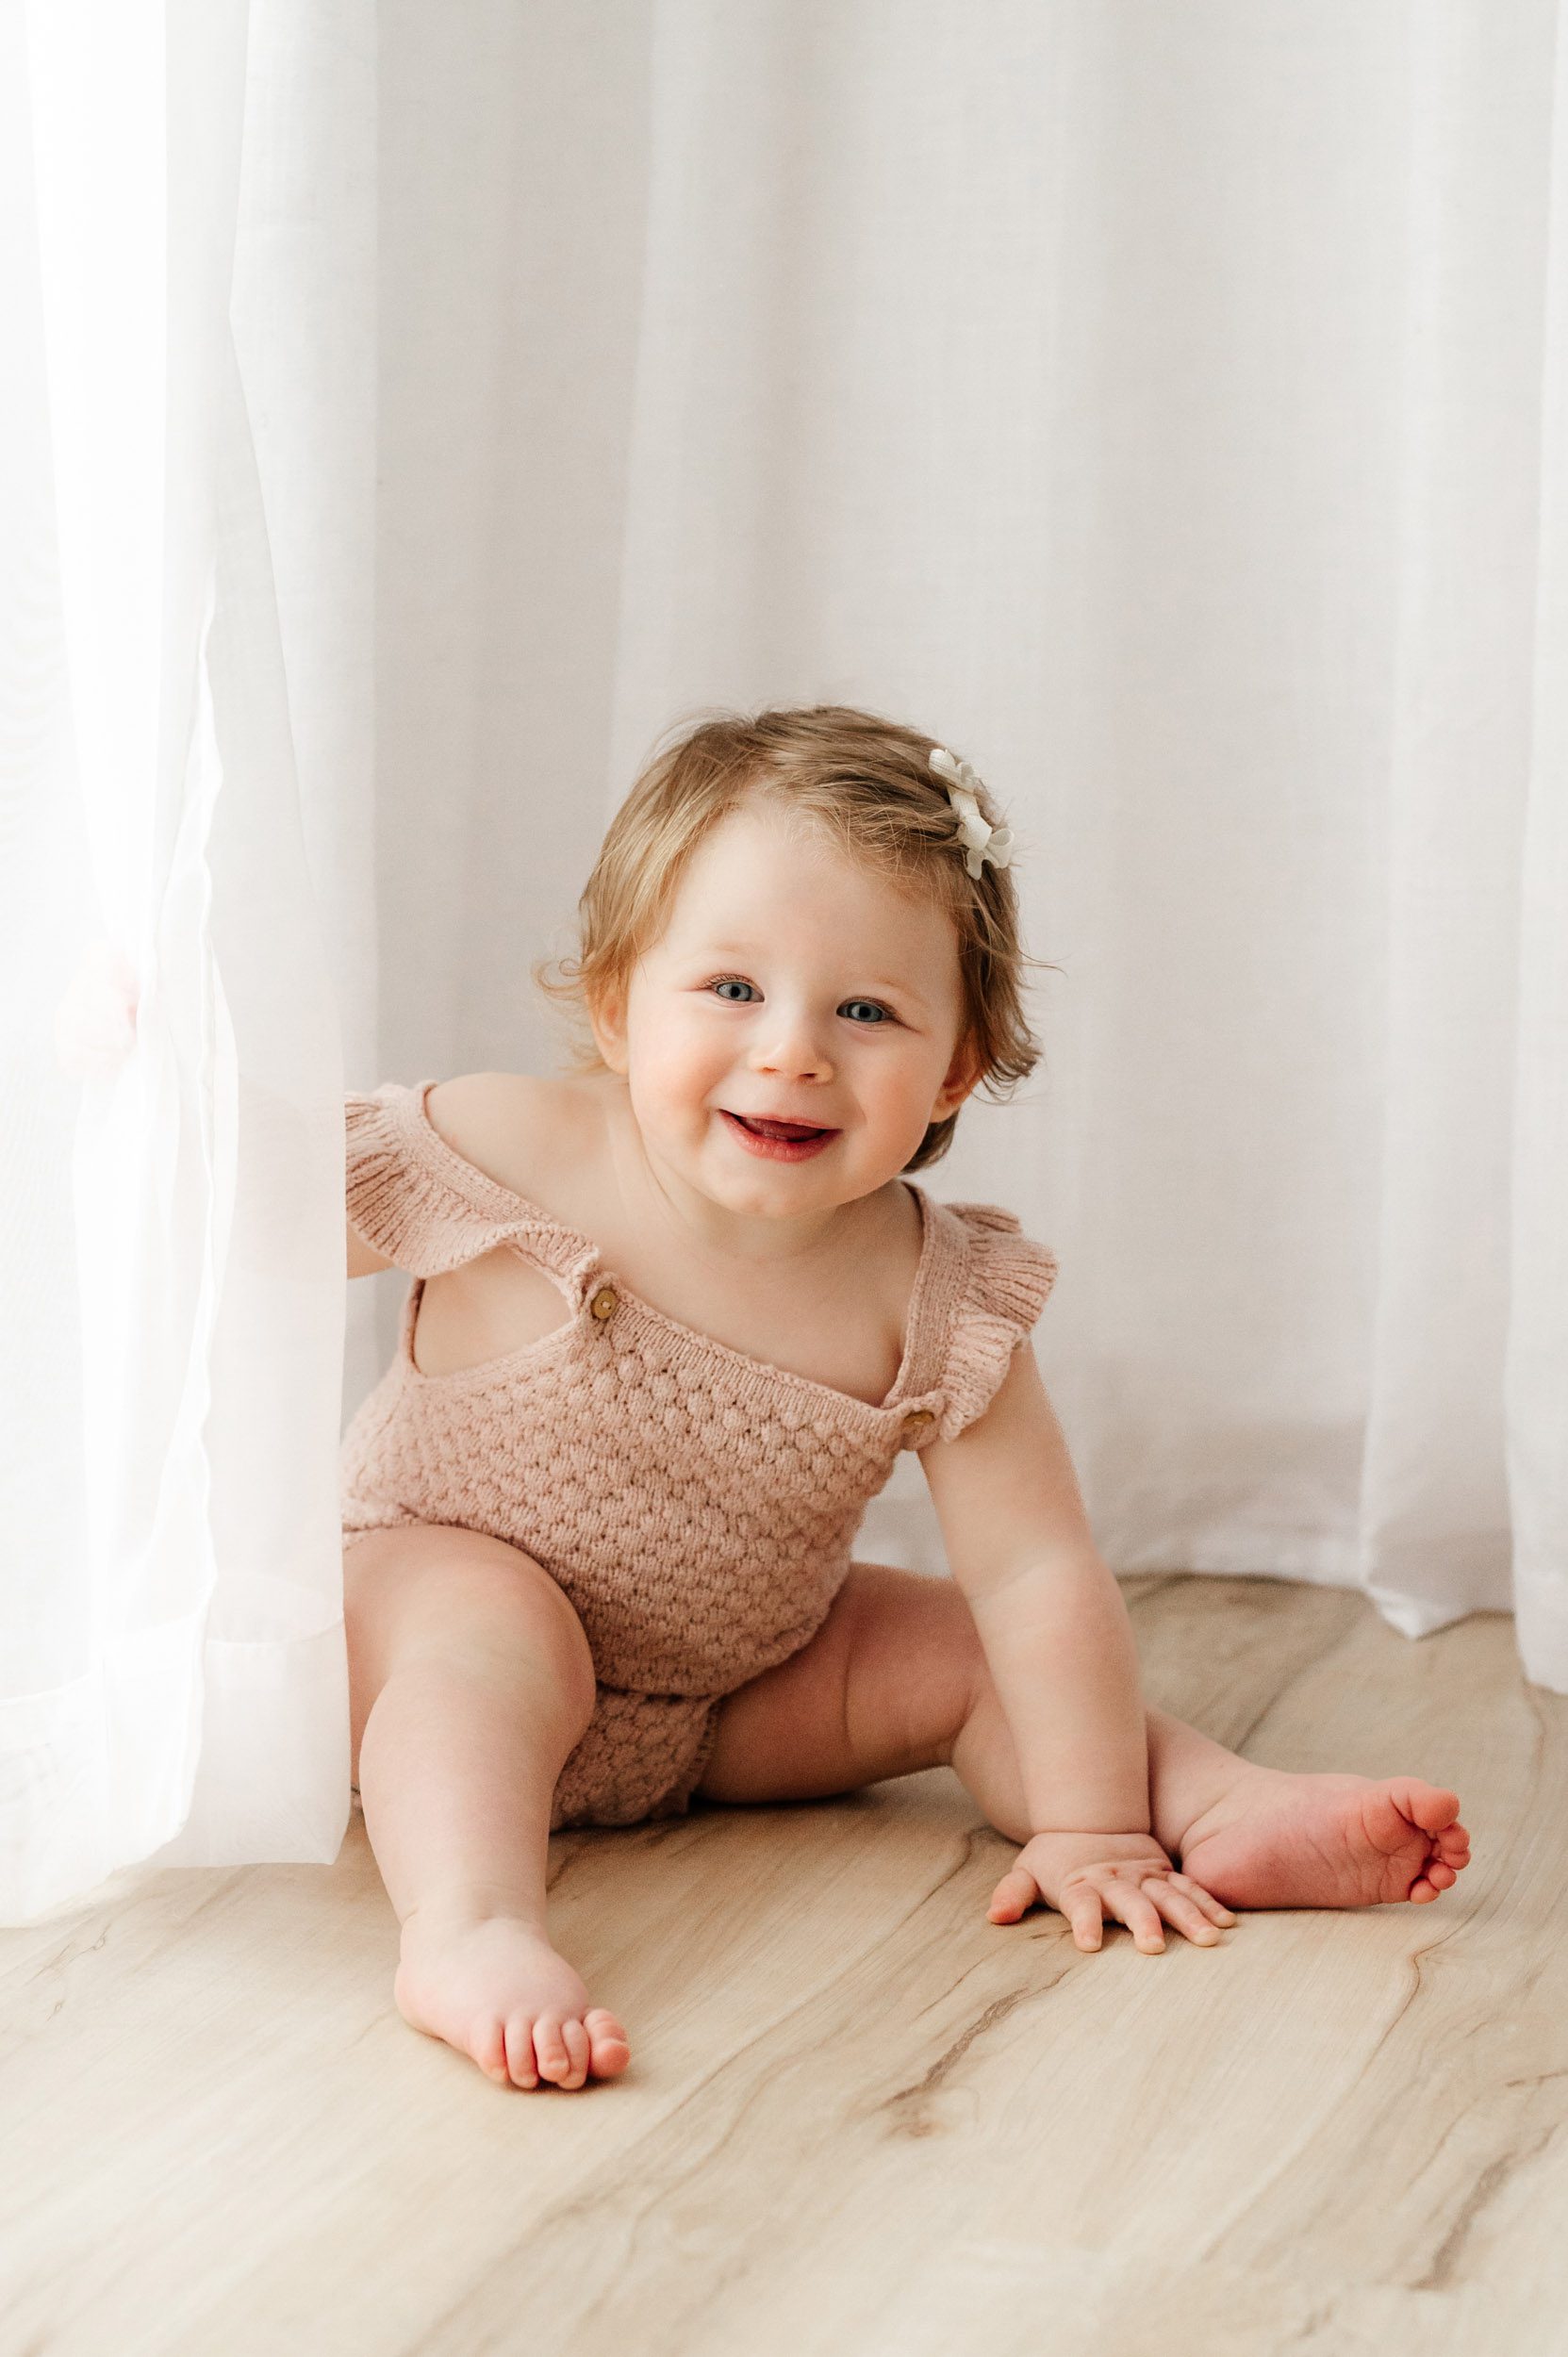 a young girl sitting in front of a white curtain and leaning forward and smiling at the camera during a milestone photoshoot